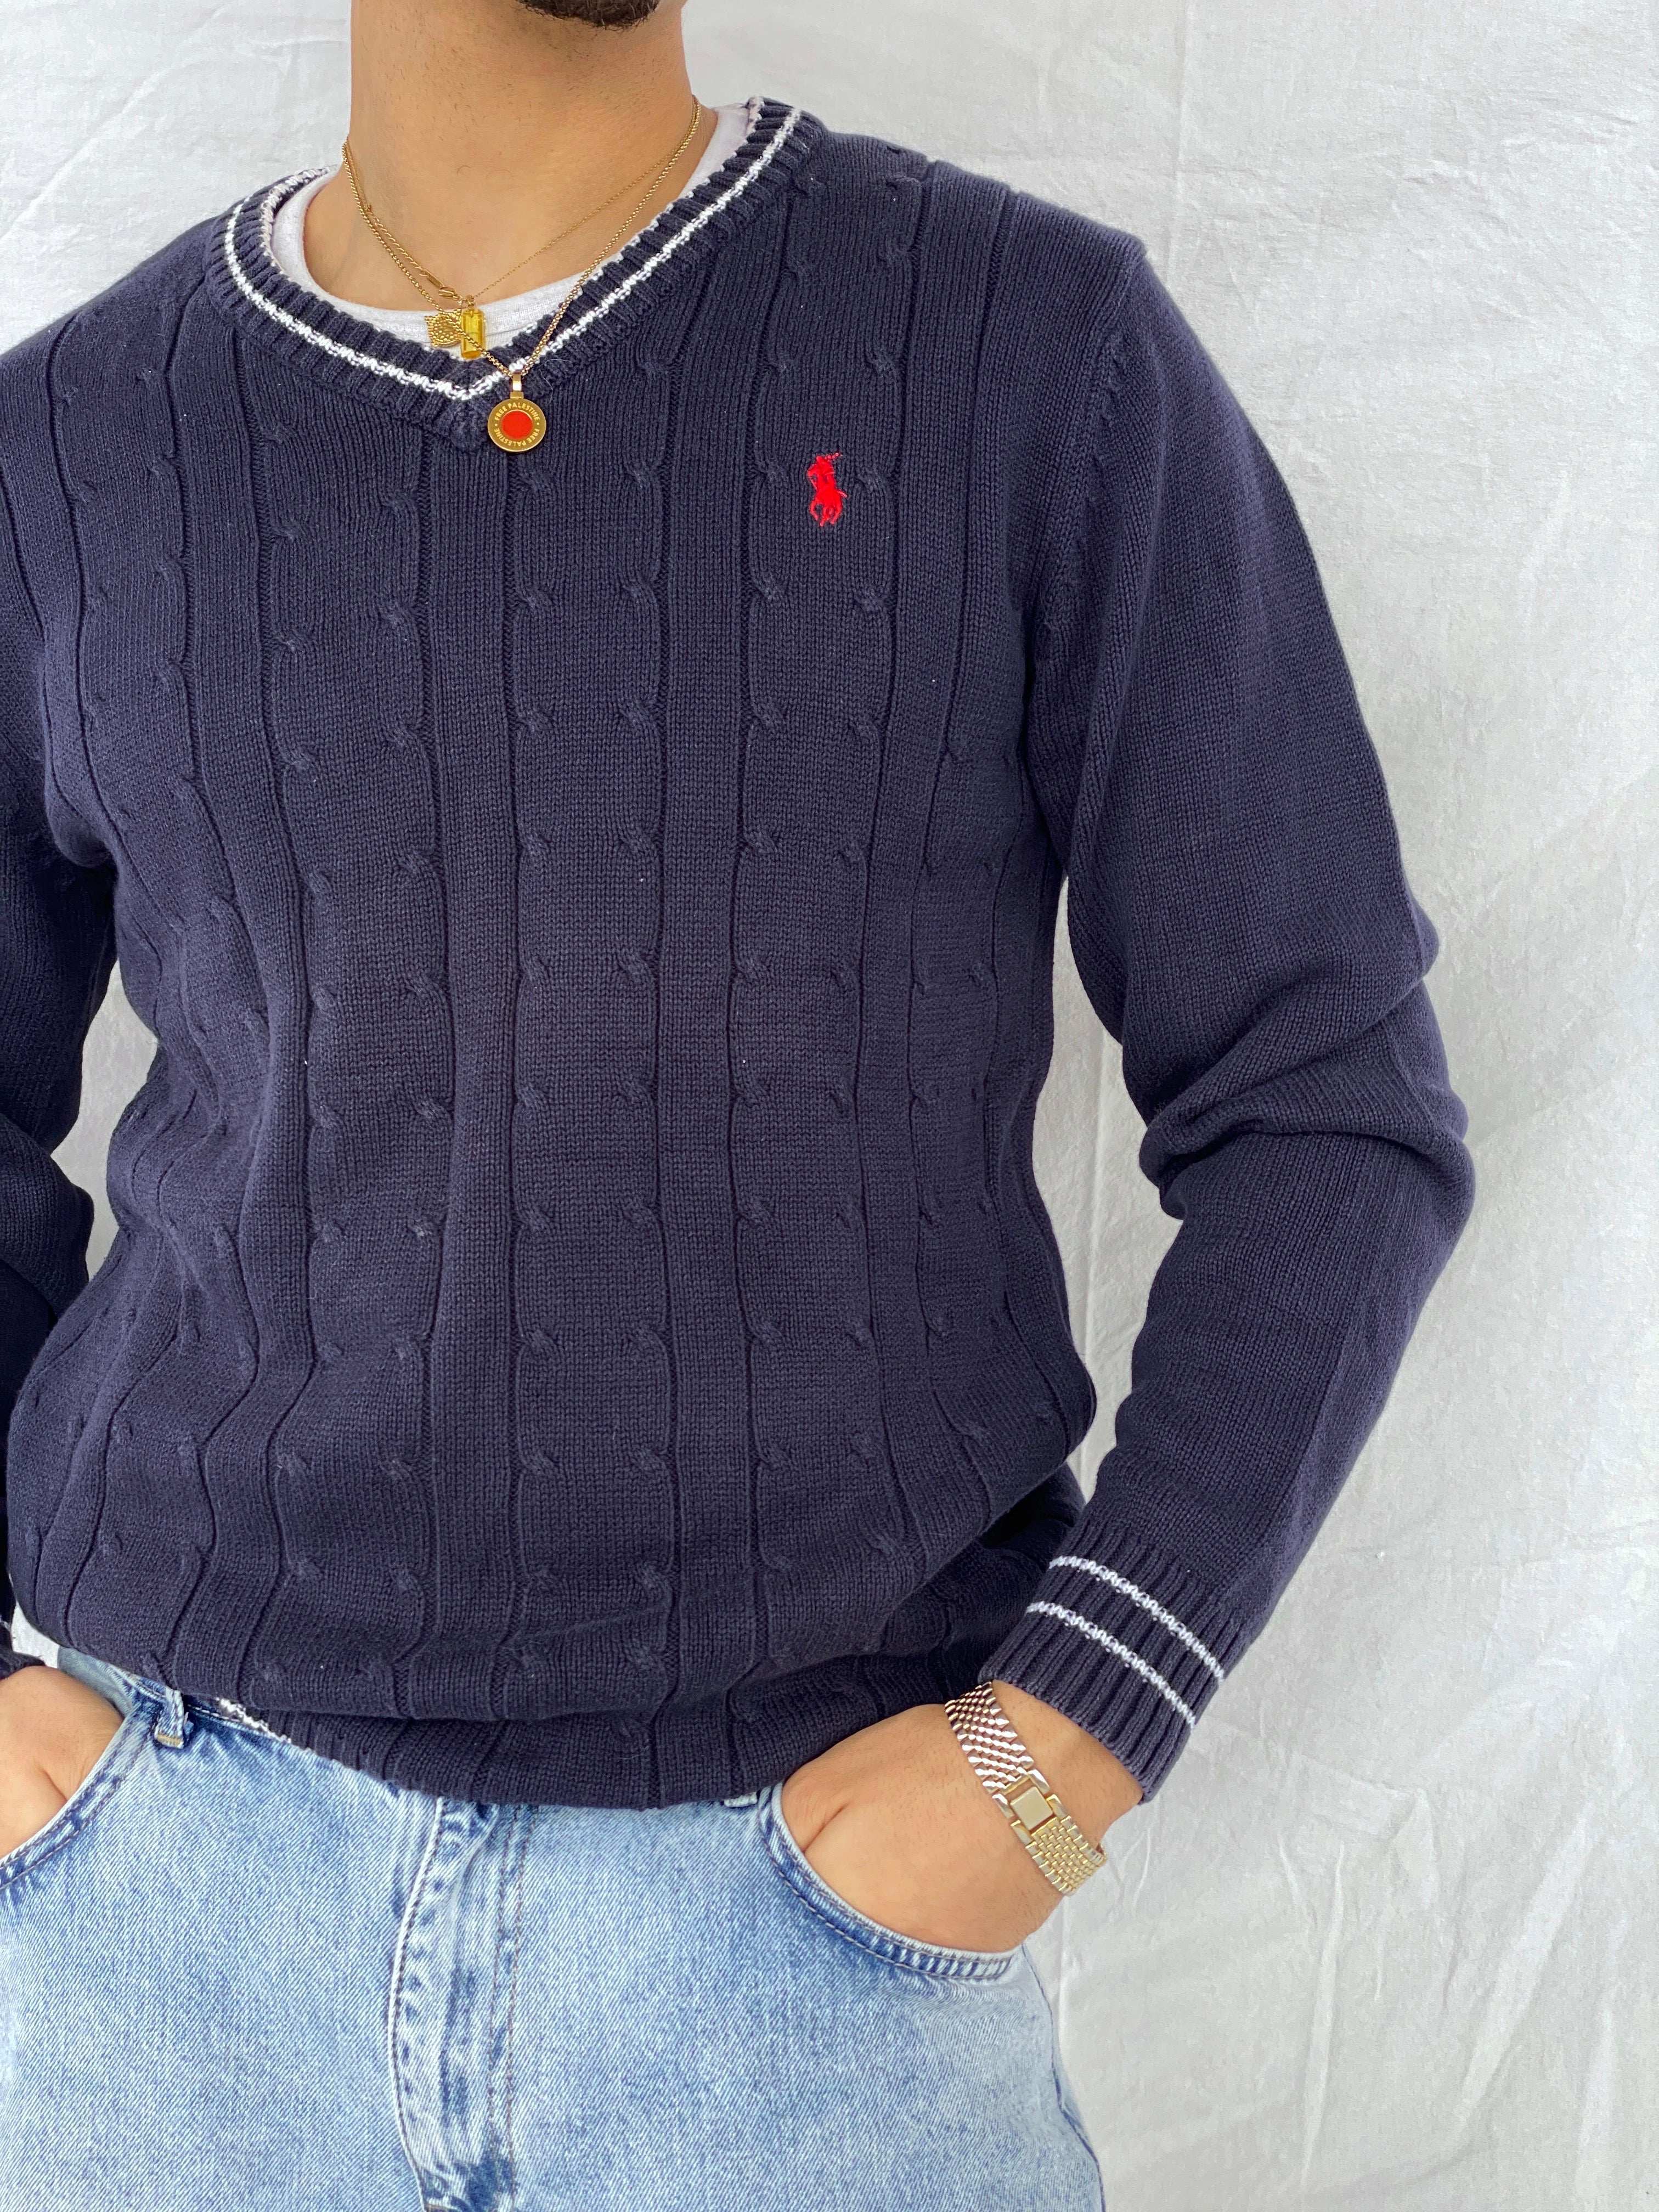 Polo By Ralph Lauren Navy Sweater - Size XL